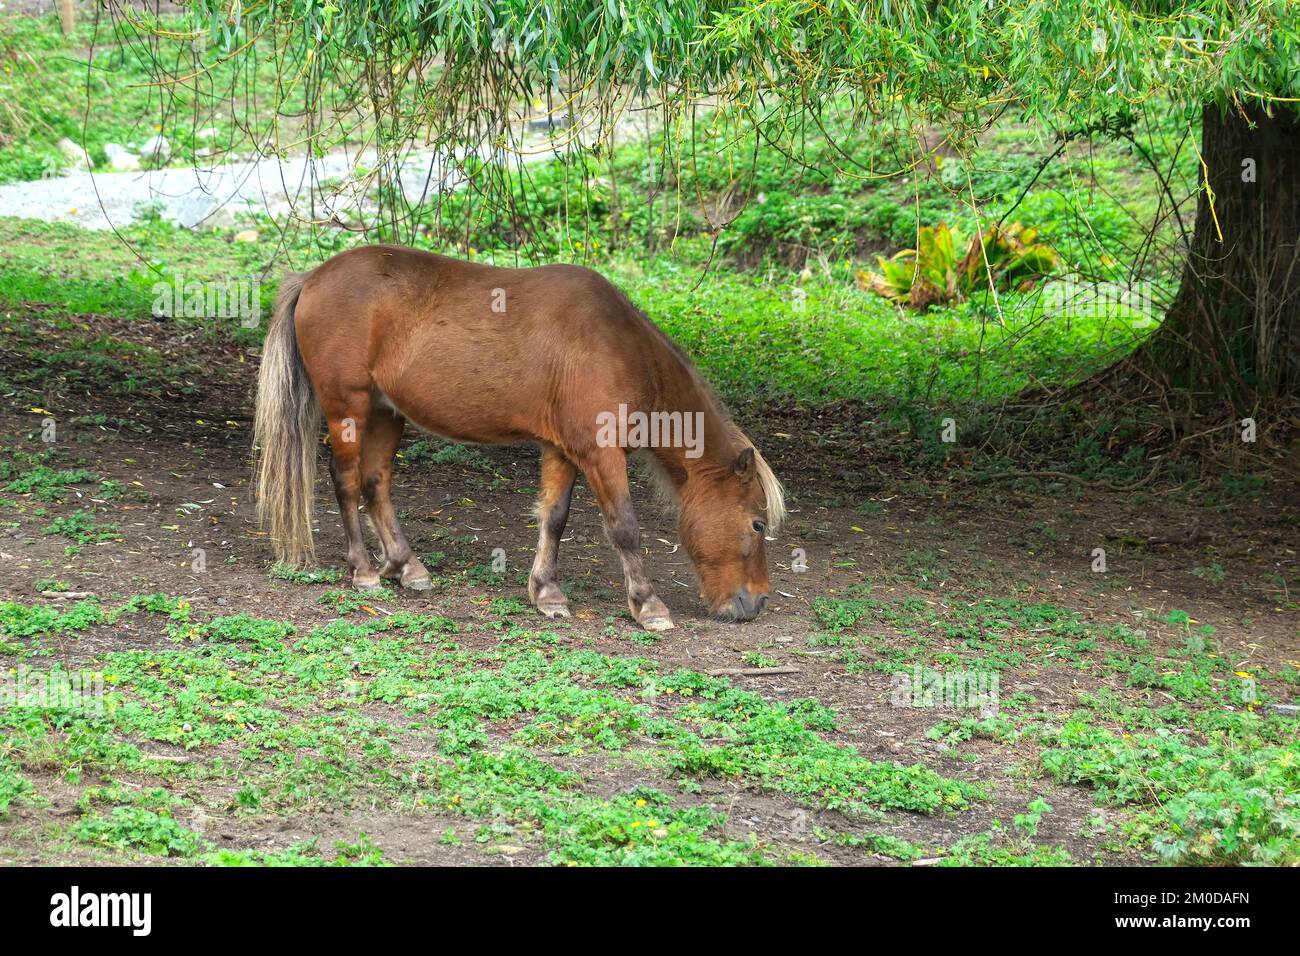 A Flaxen-chestnut Shetland pony(Equus caballus) grazing under a Weeping willow tree. Stock Photo